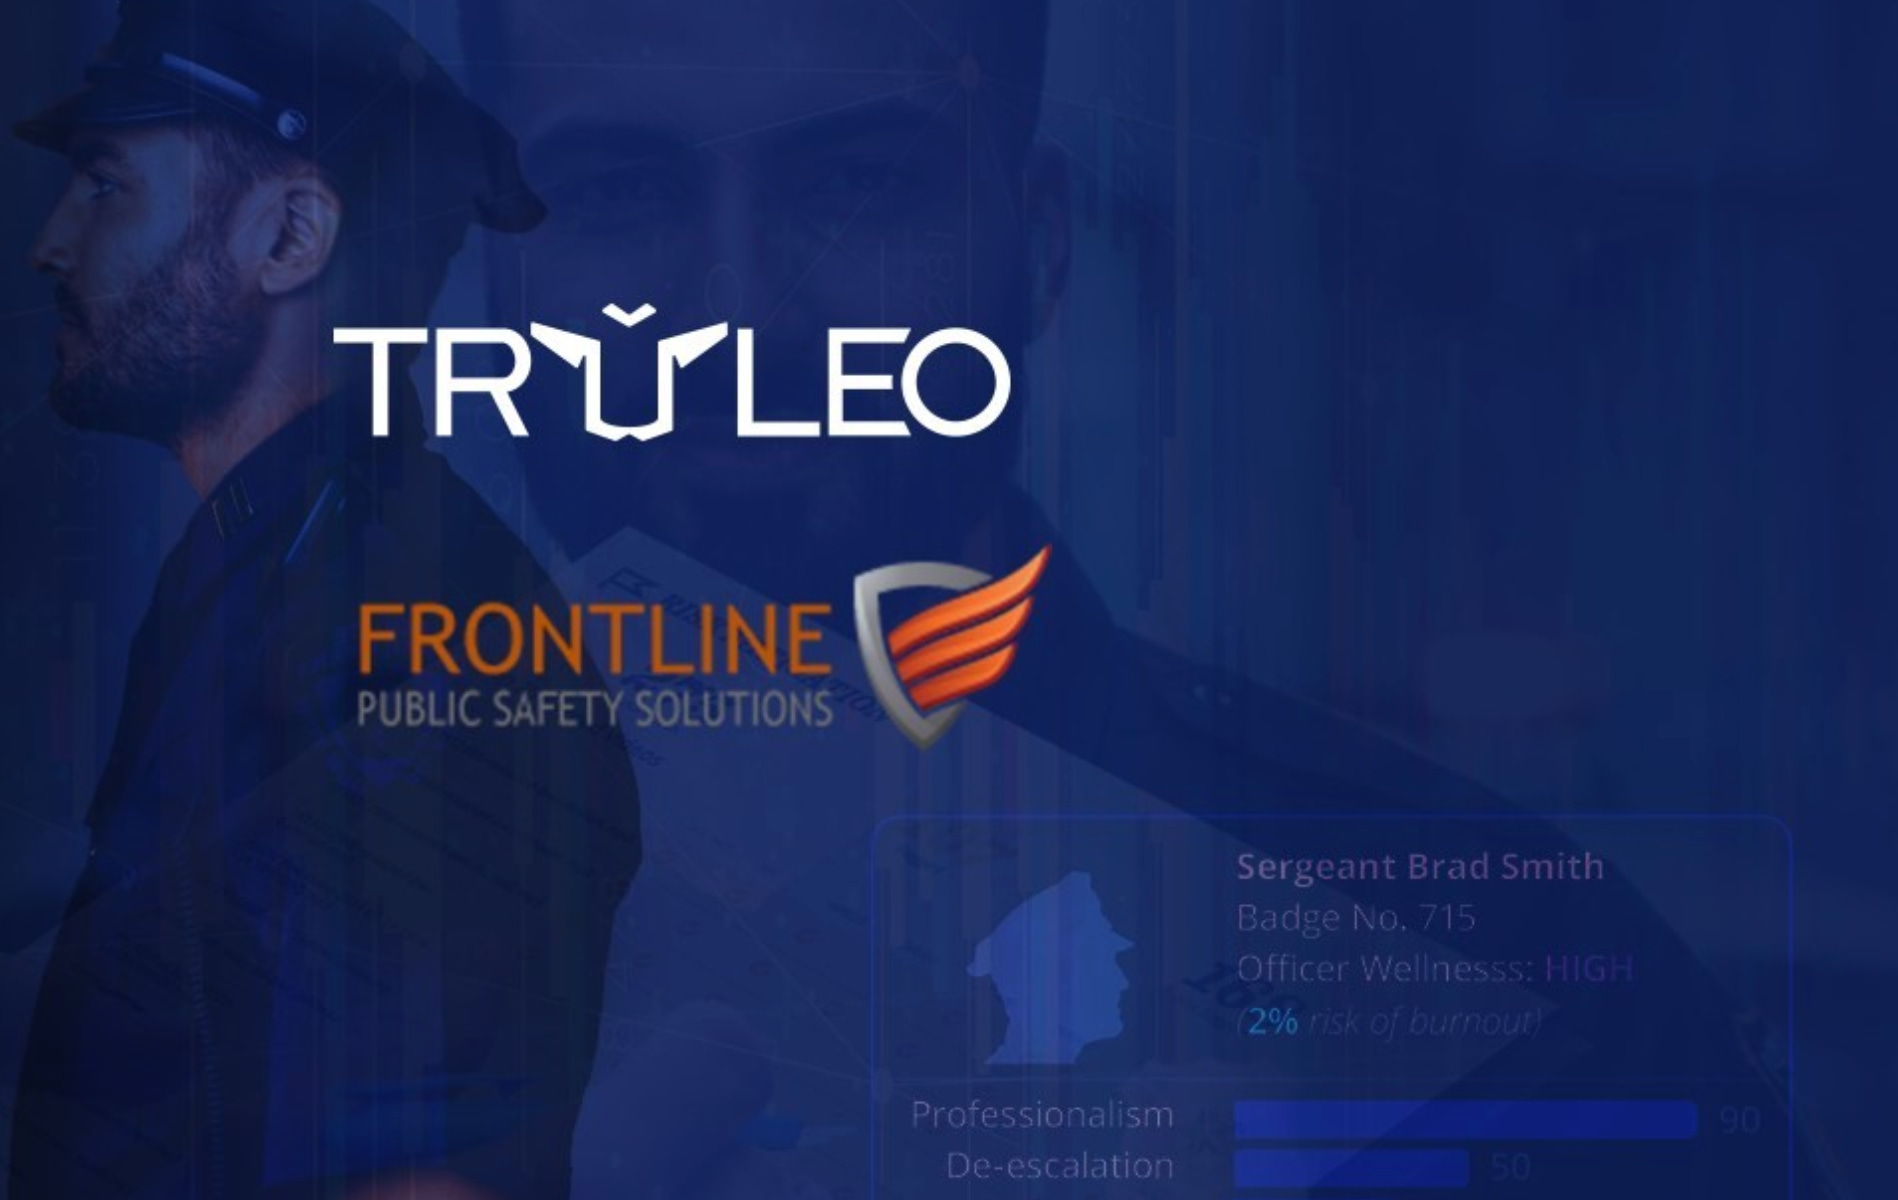 Logos of the Truleo Company and Frontline Public Safety Solution on a translucent navy blue background with a police officer barely visible in the background